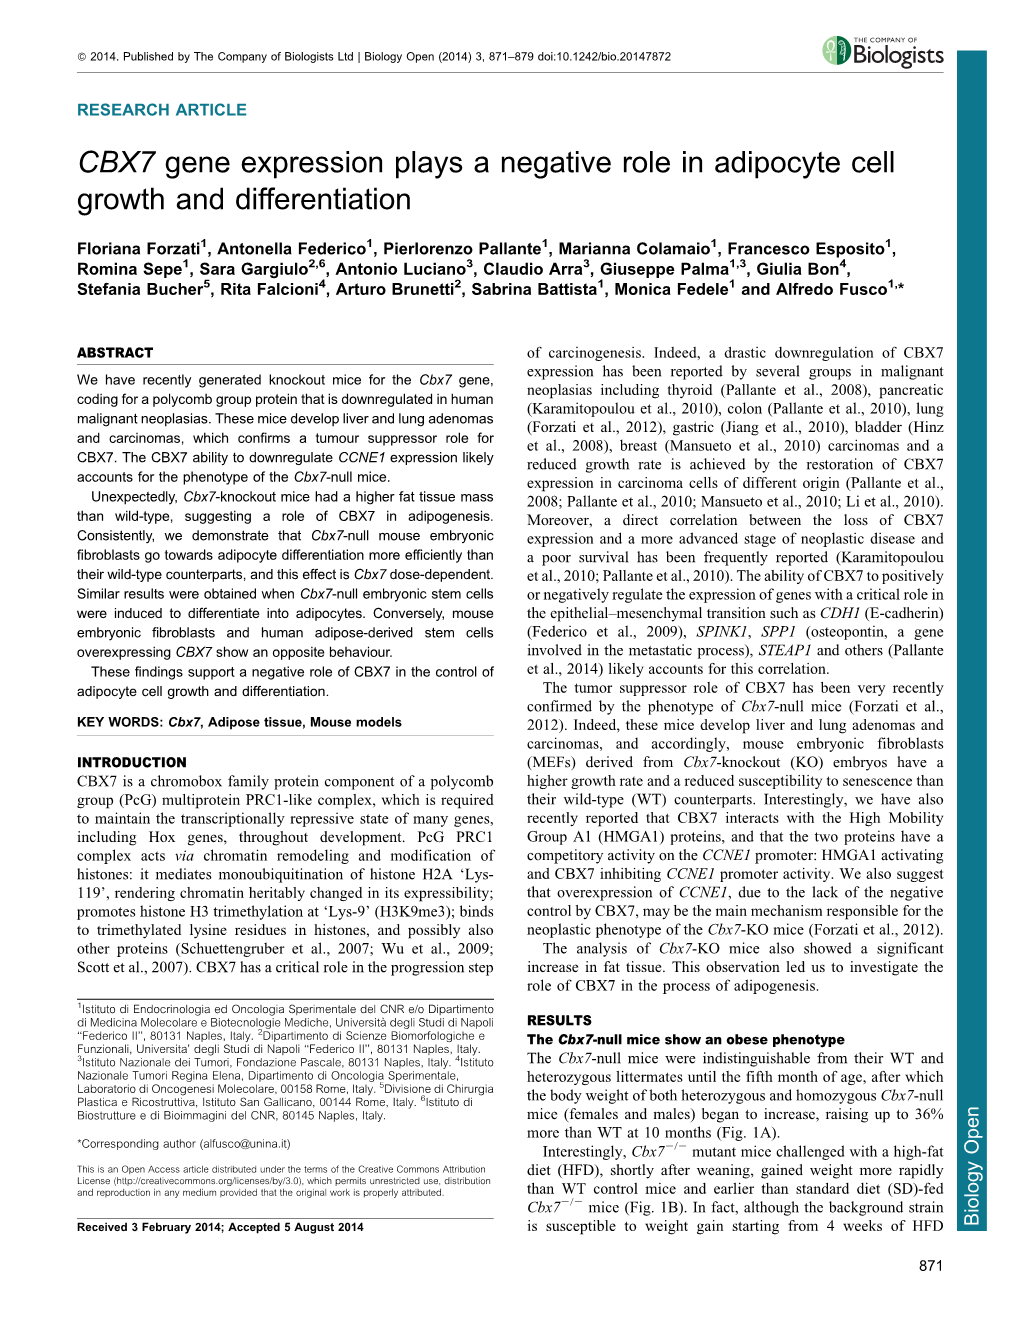 CBX7 Gene Expression Plays a Negative Role in Adipocyte Cell Growth and Differentiation